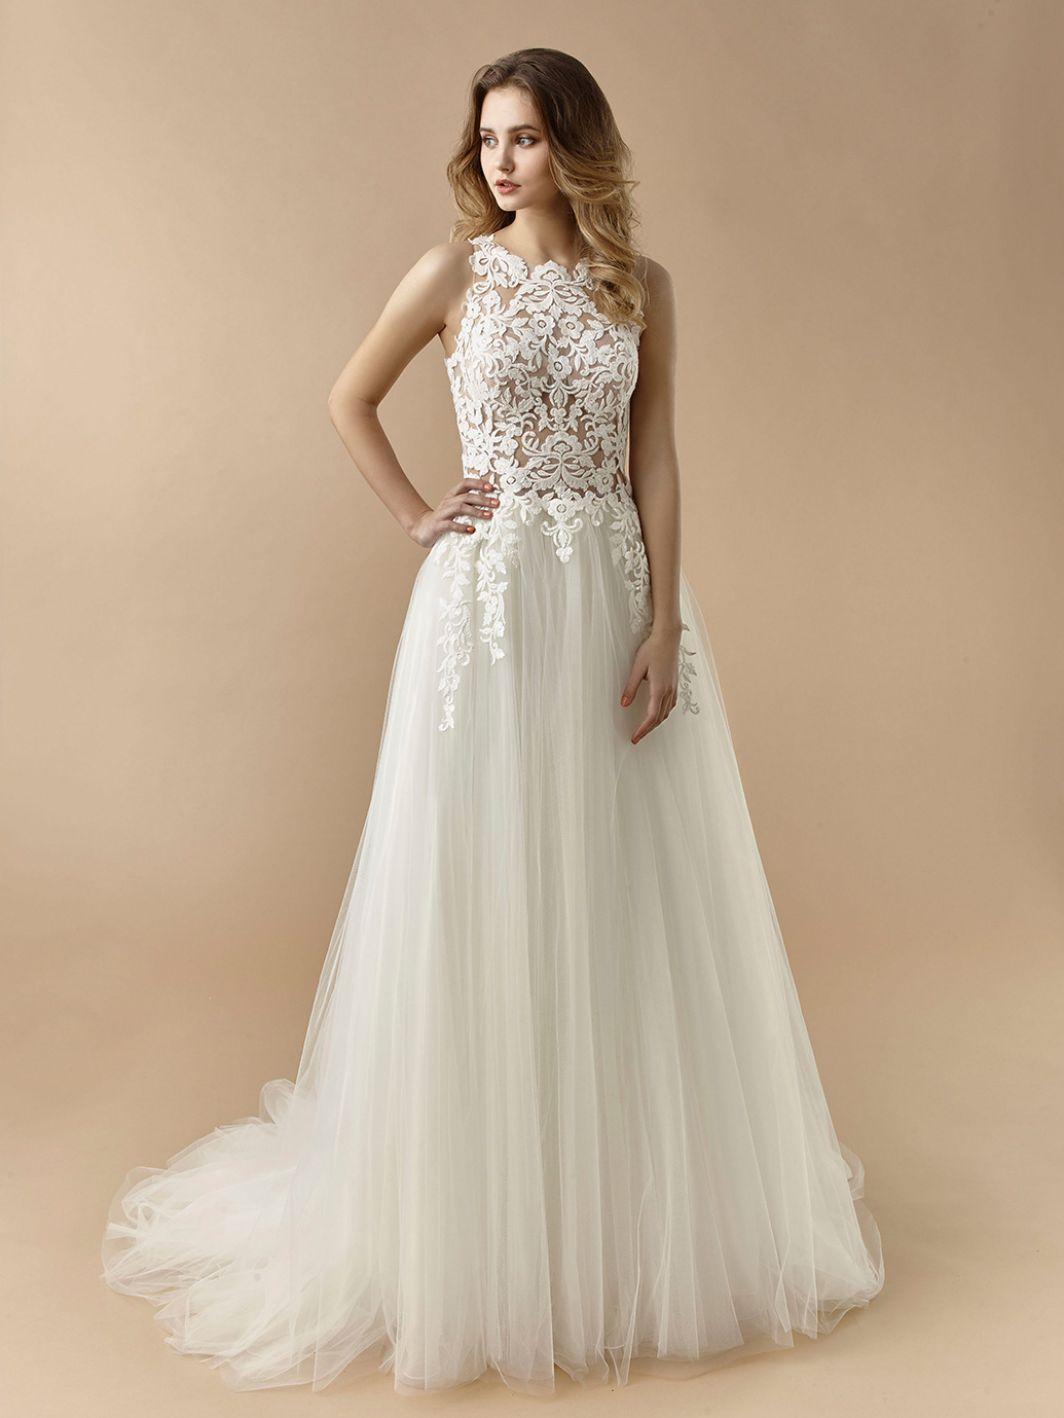 Lace and Tulle A-Line Gown by Enzoani Style BT20-10 Size 14